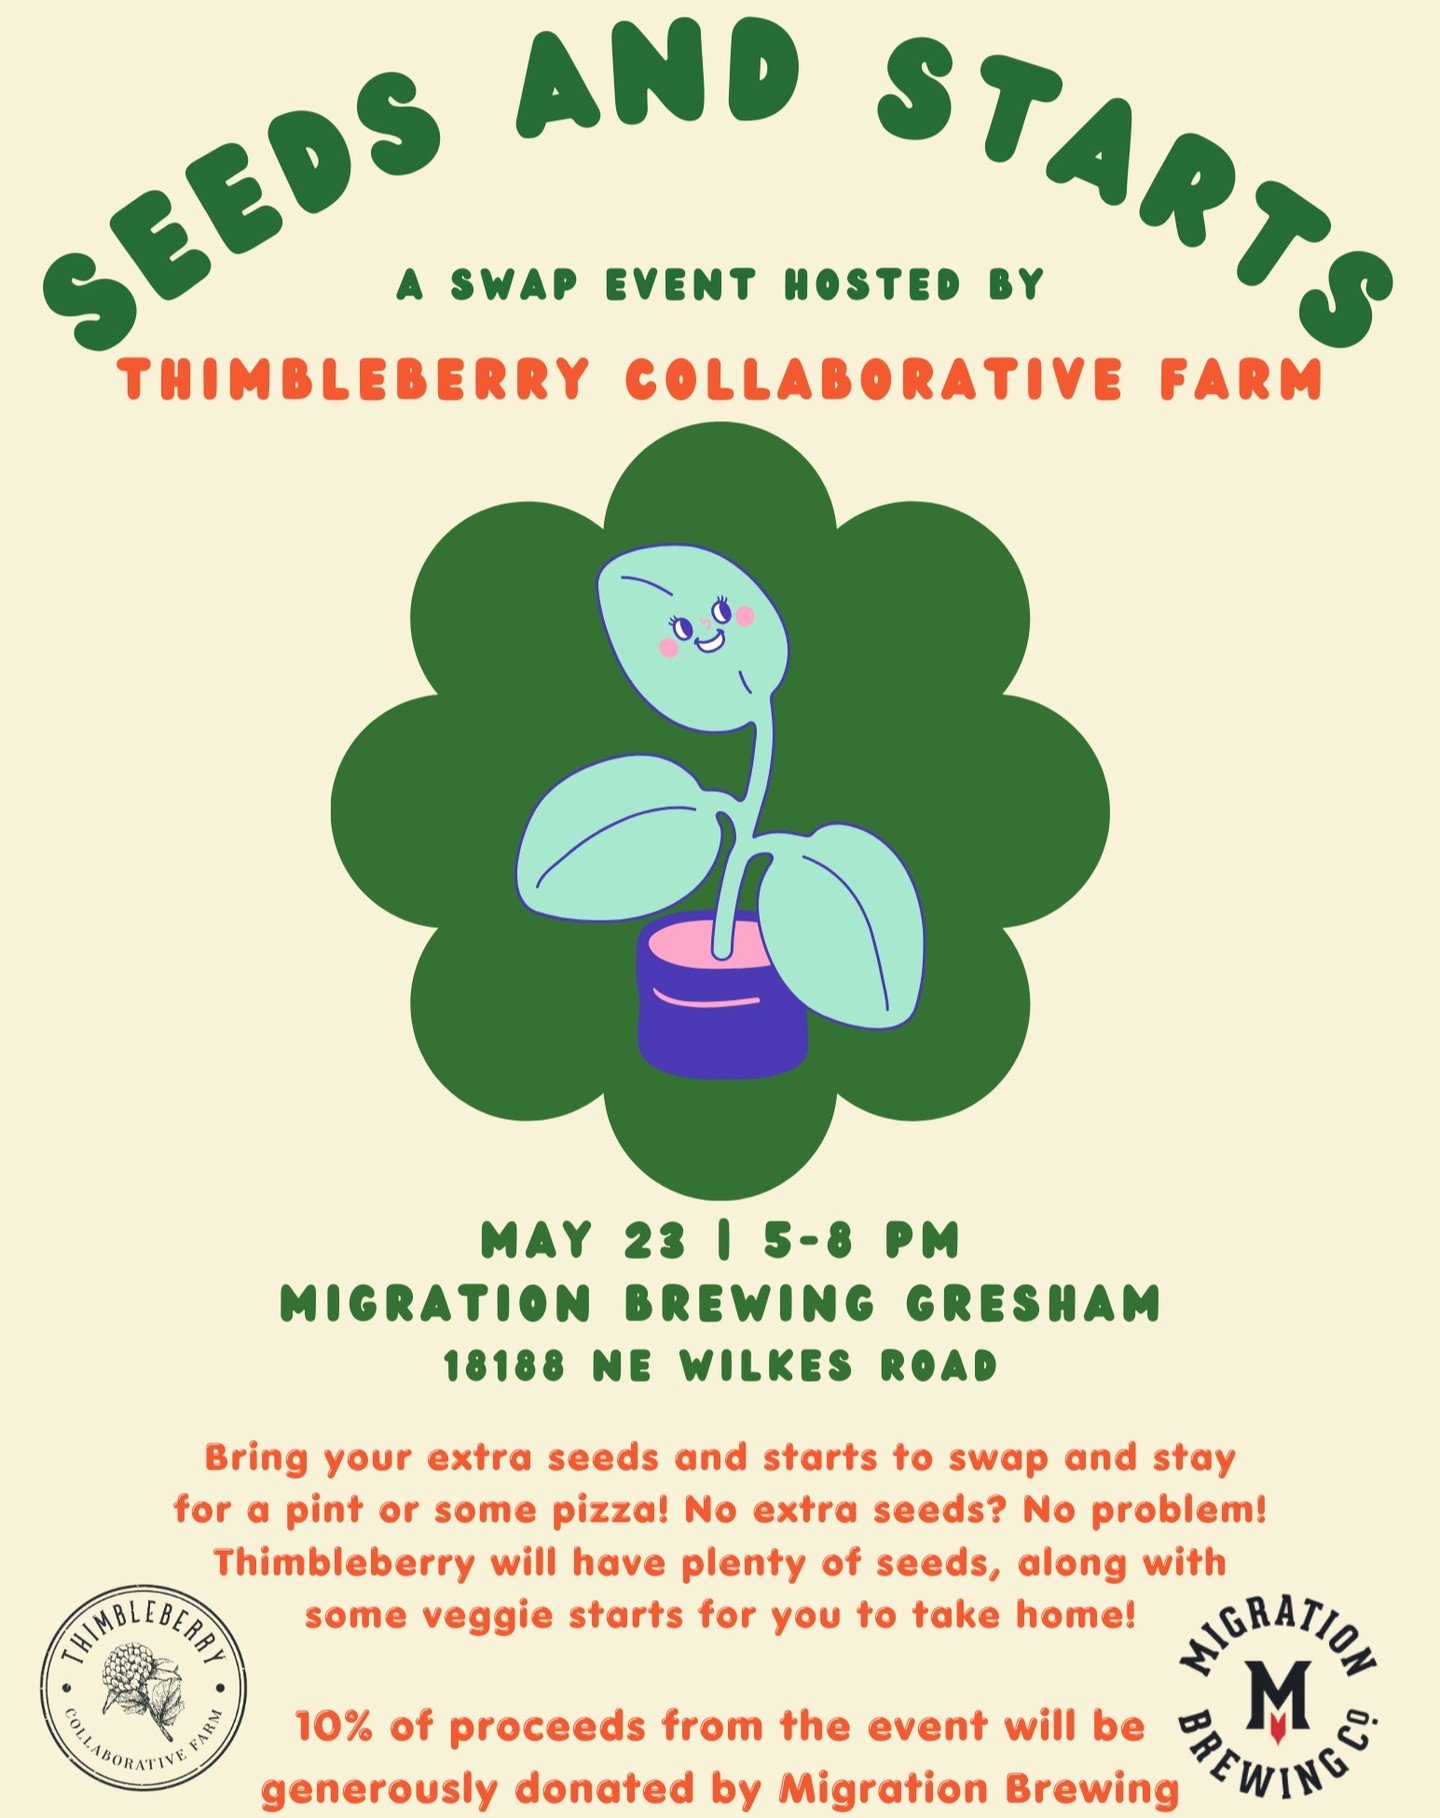 Come plan your garden with us!

Thimbleberry will be hosting a Seed and Starts swap at @migrationbrewing in Gresham on May 23rd. We will have lots of seeds and some veggie starts to share. You are welcome to bring extra seeds and starts from home to 